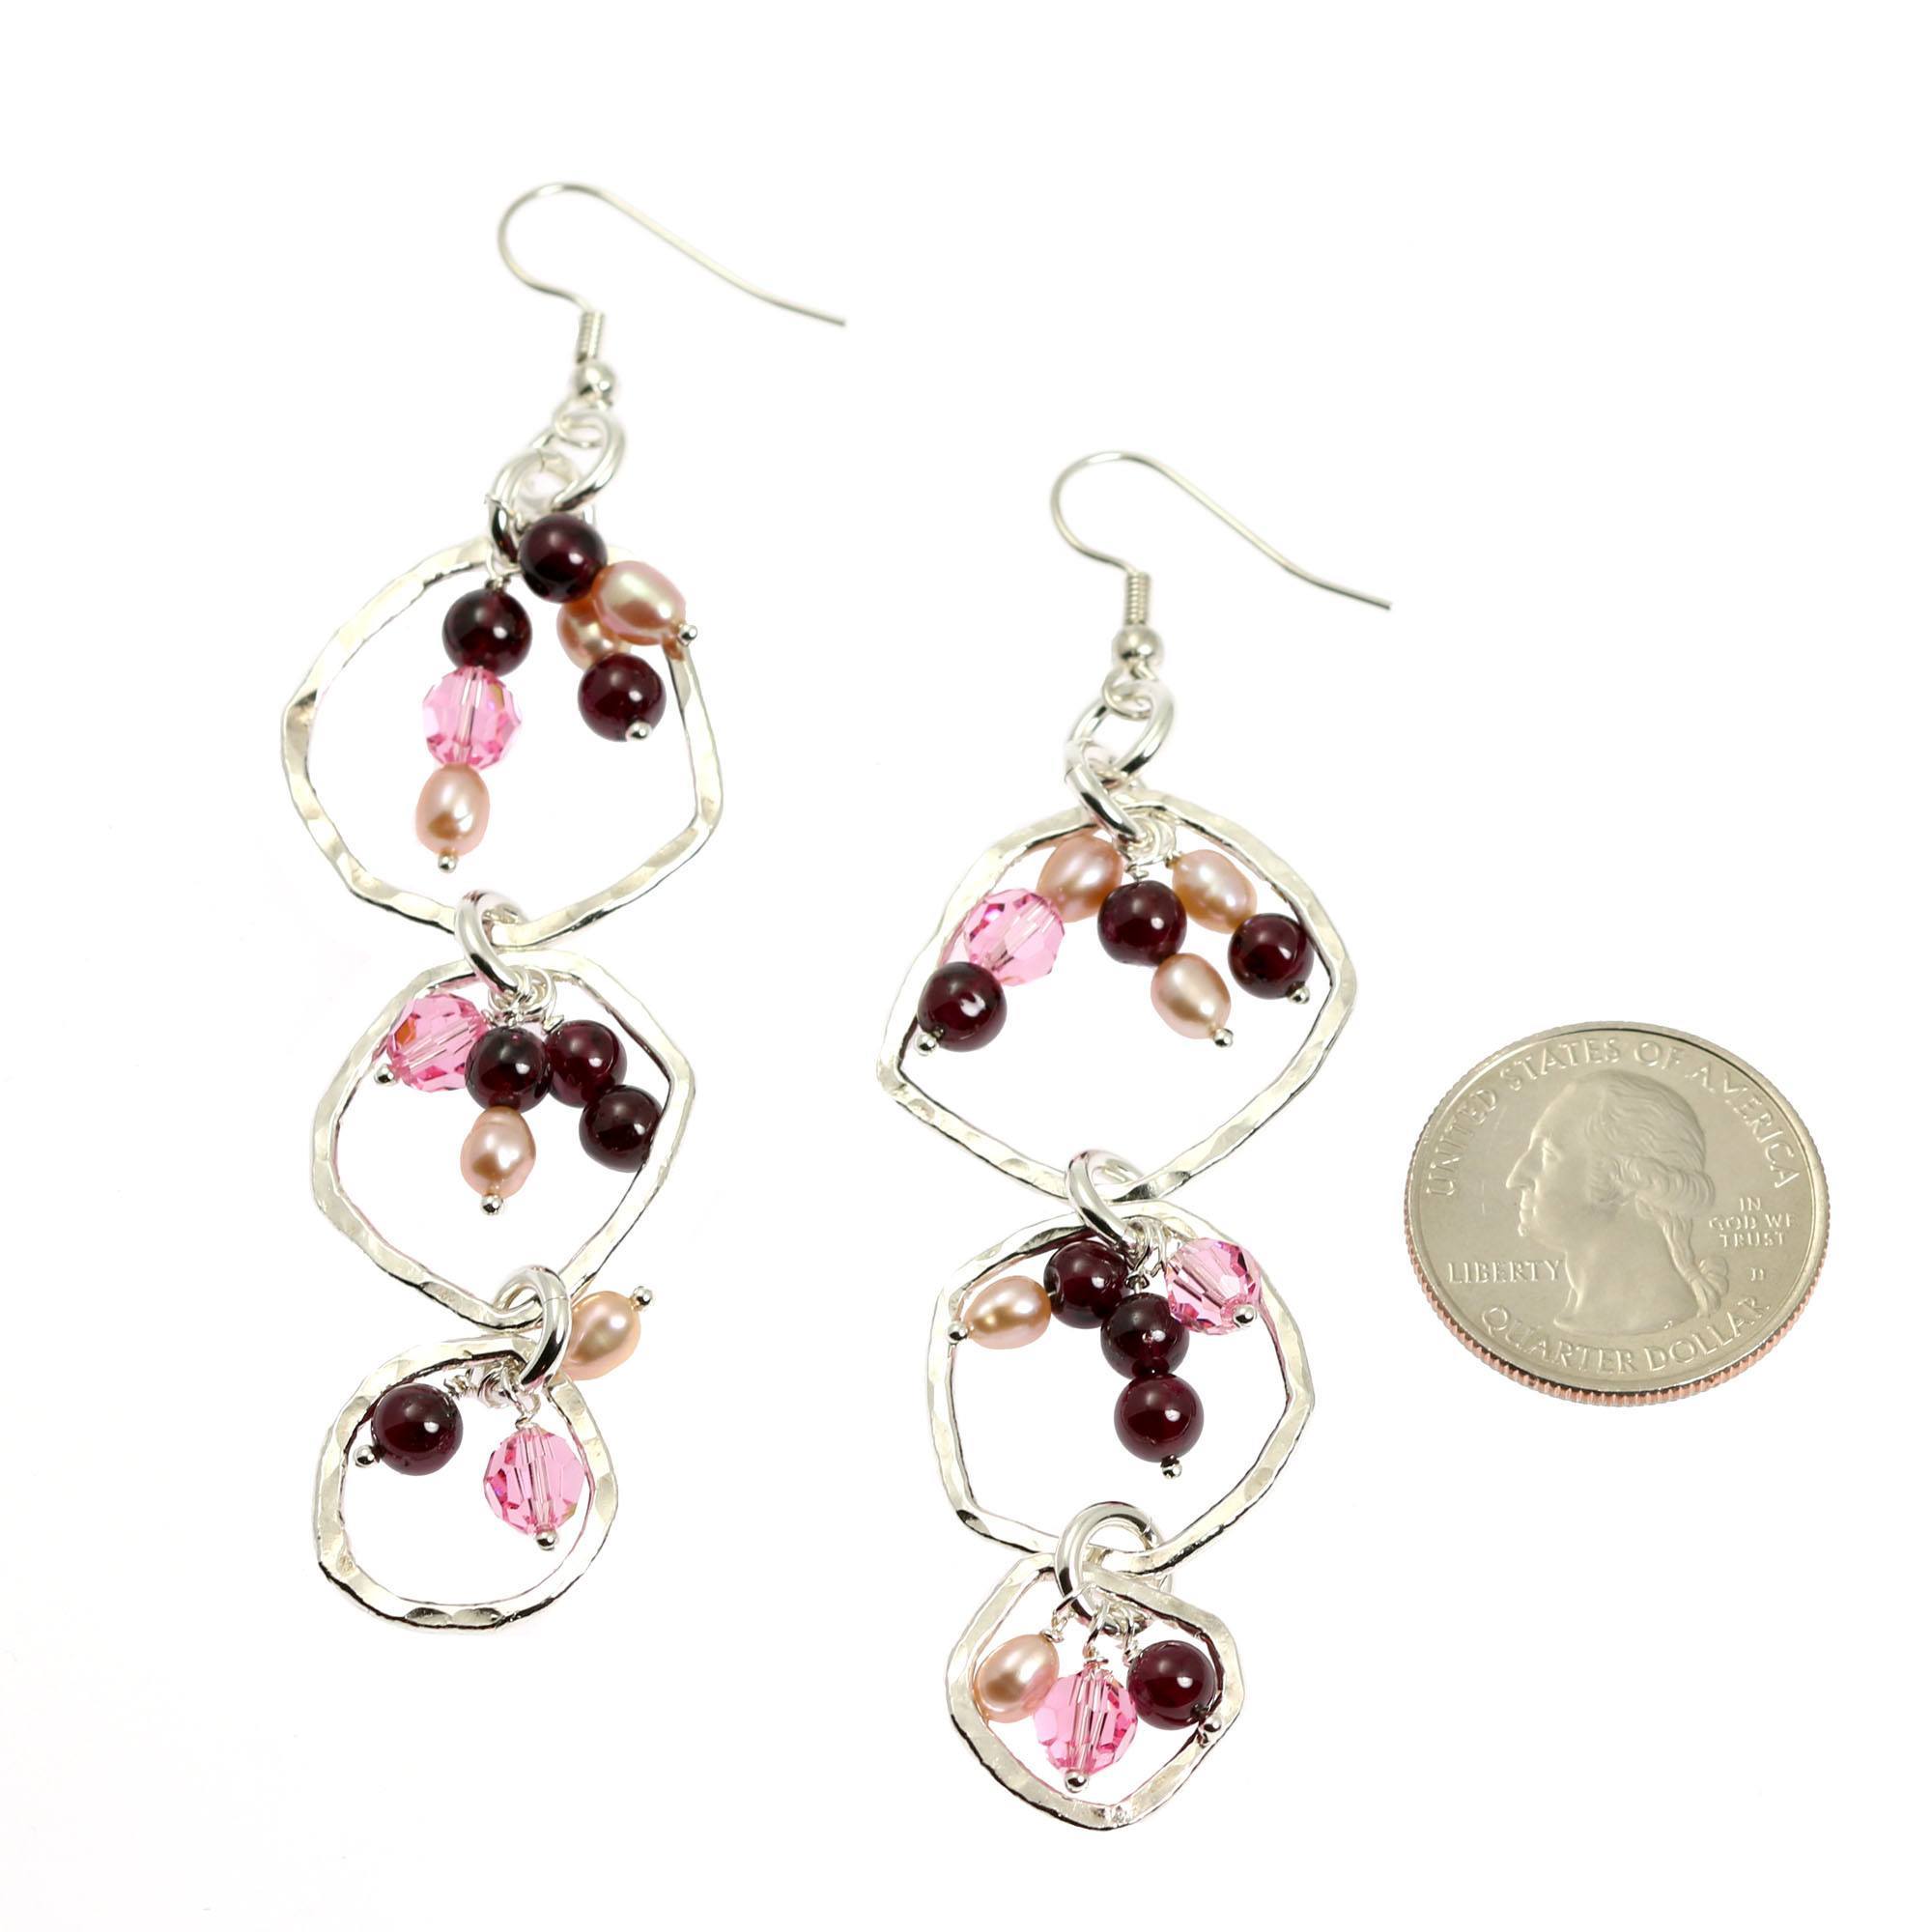 Size of Hammered Fine Silver Earrings with Garnets